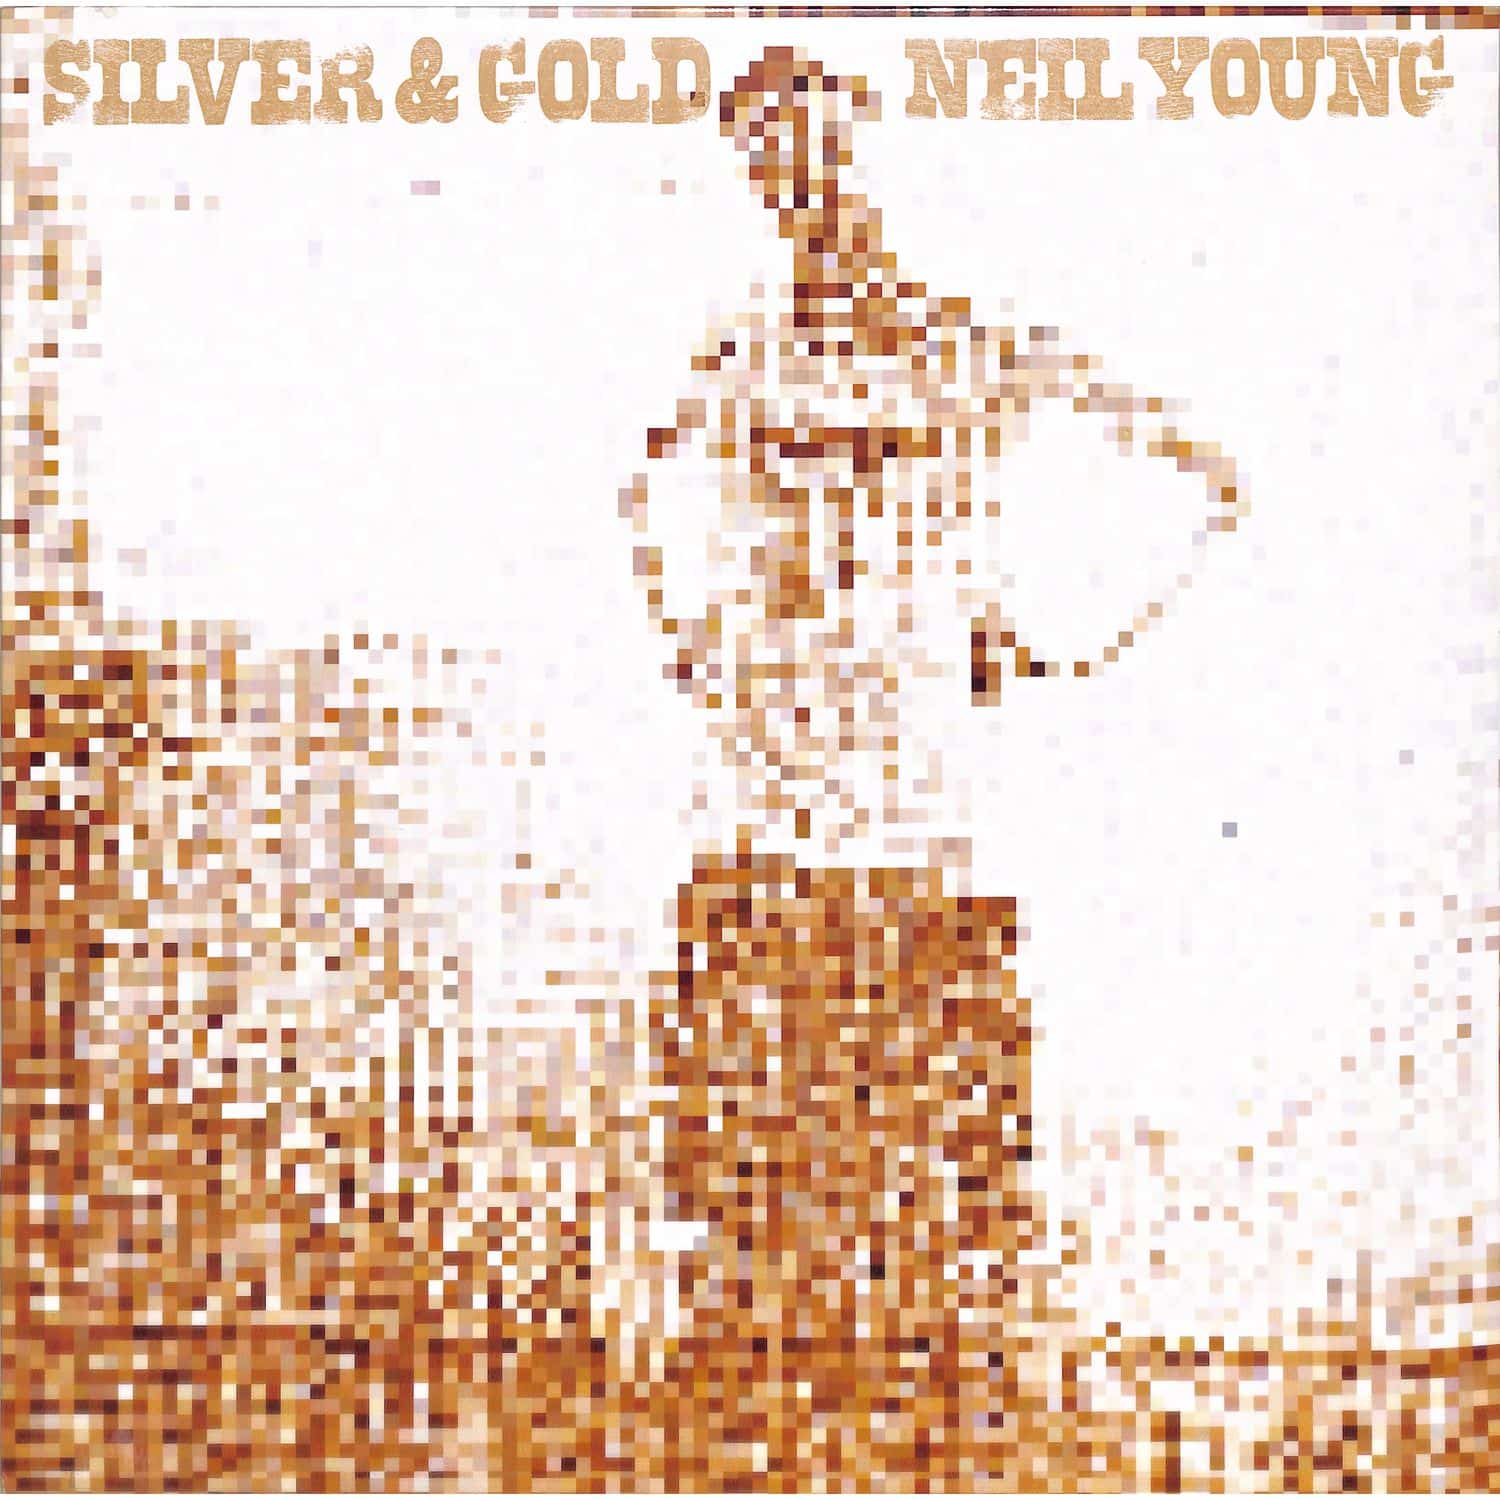 Neil Young - SILVER & GOLD 